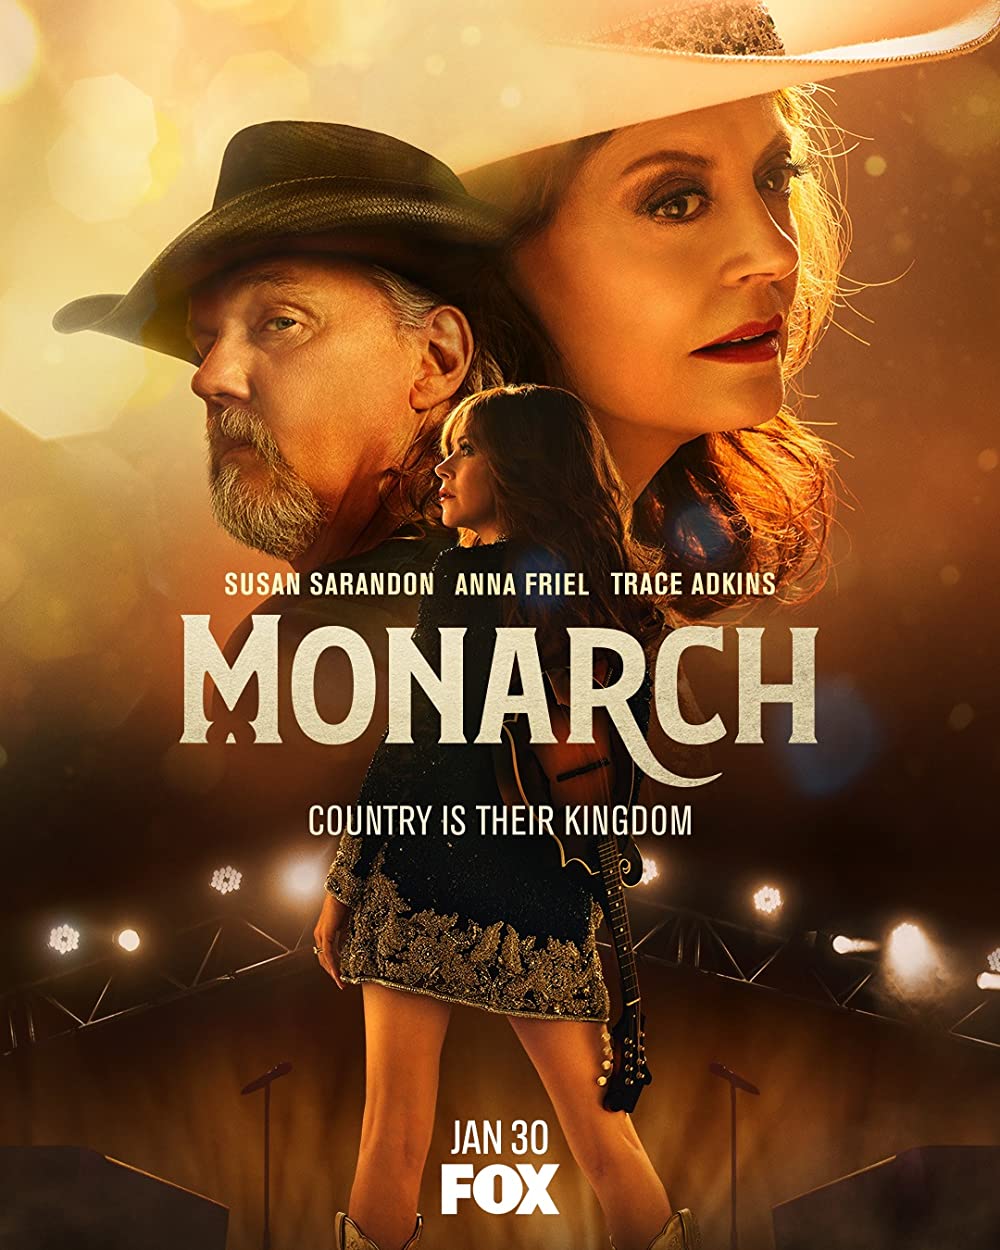 Where can I watch the show Monarch Season 1